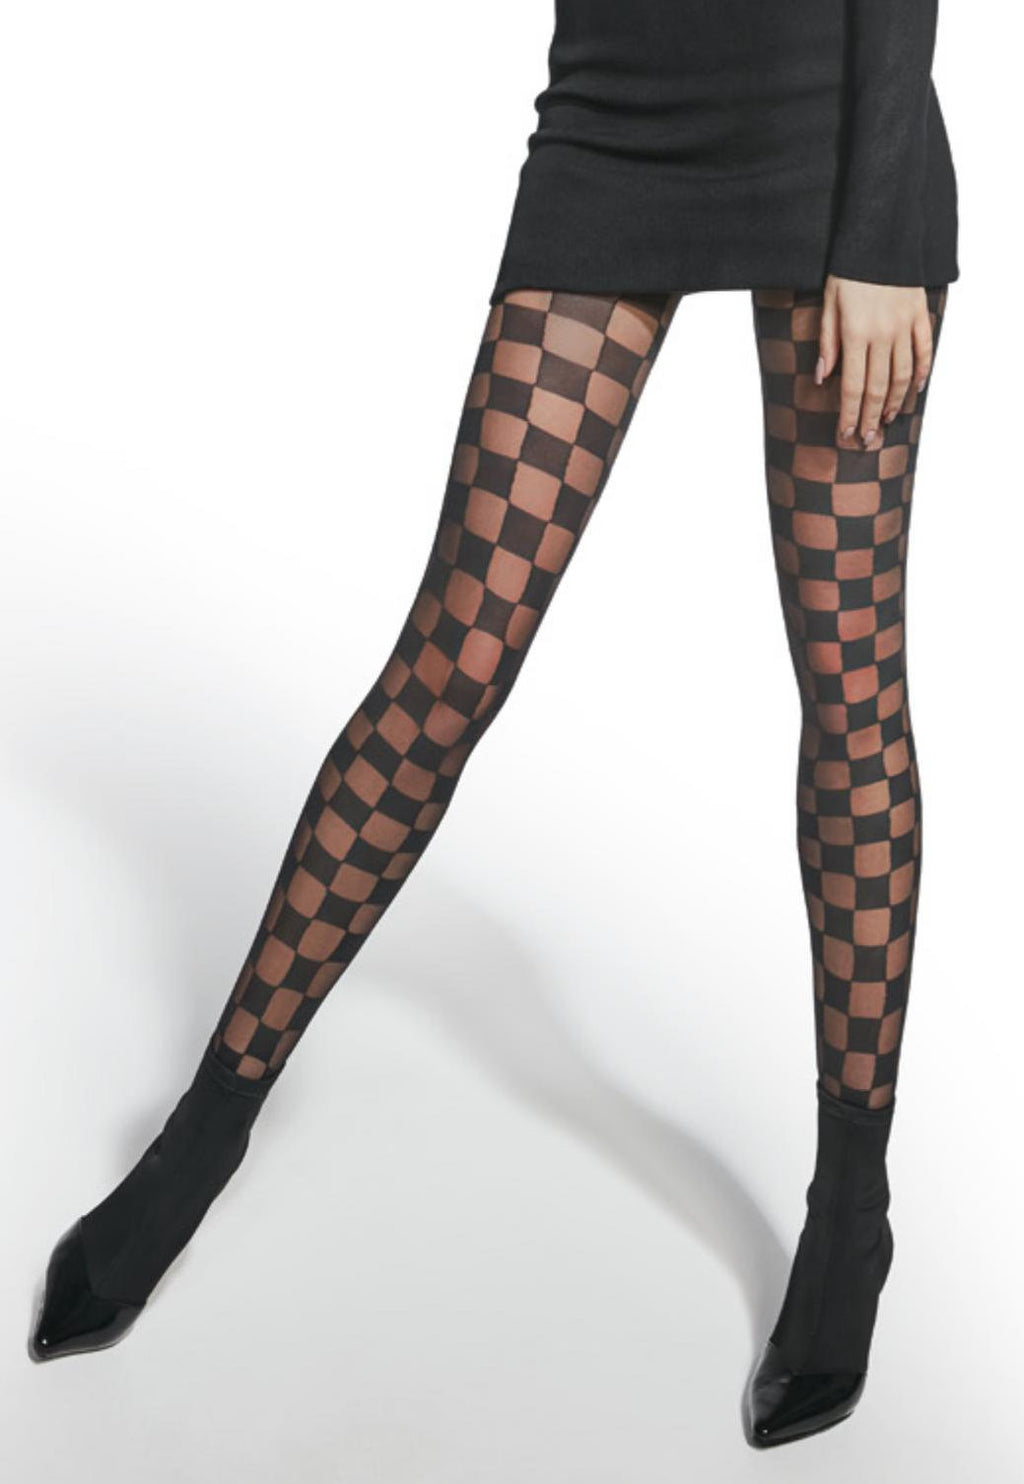 Beth Chessboard Check Patterned Fashion Tights at Ireland's Online